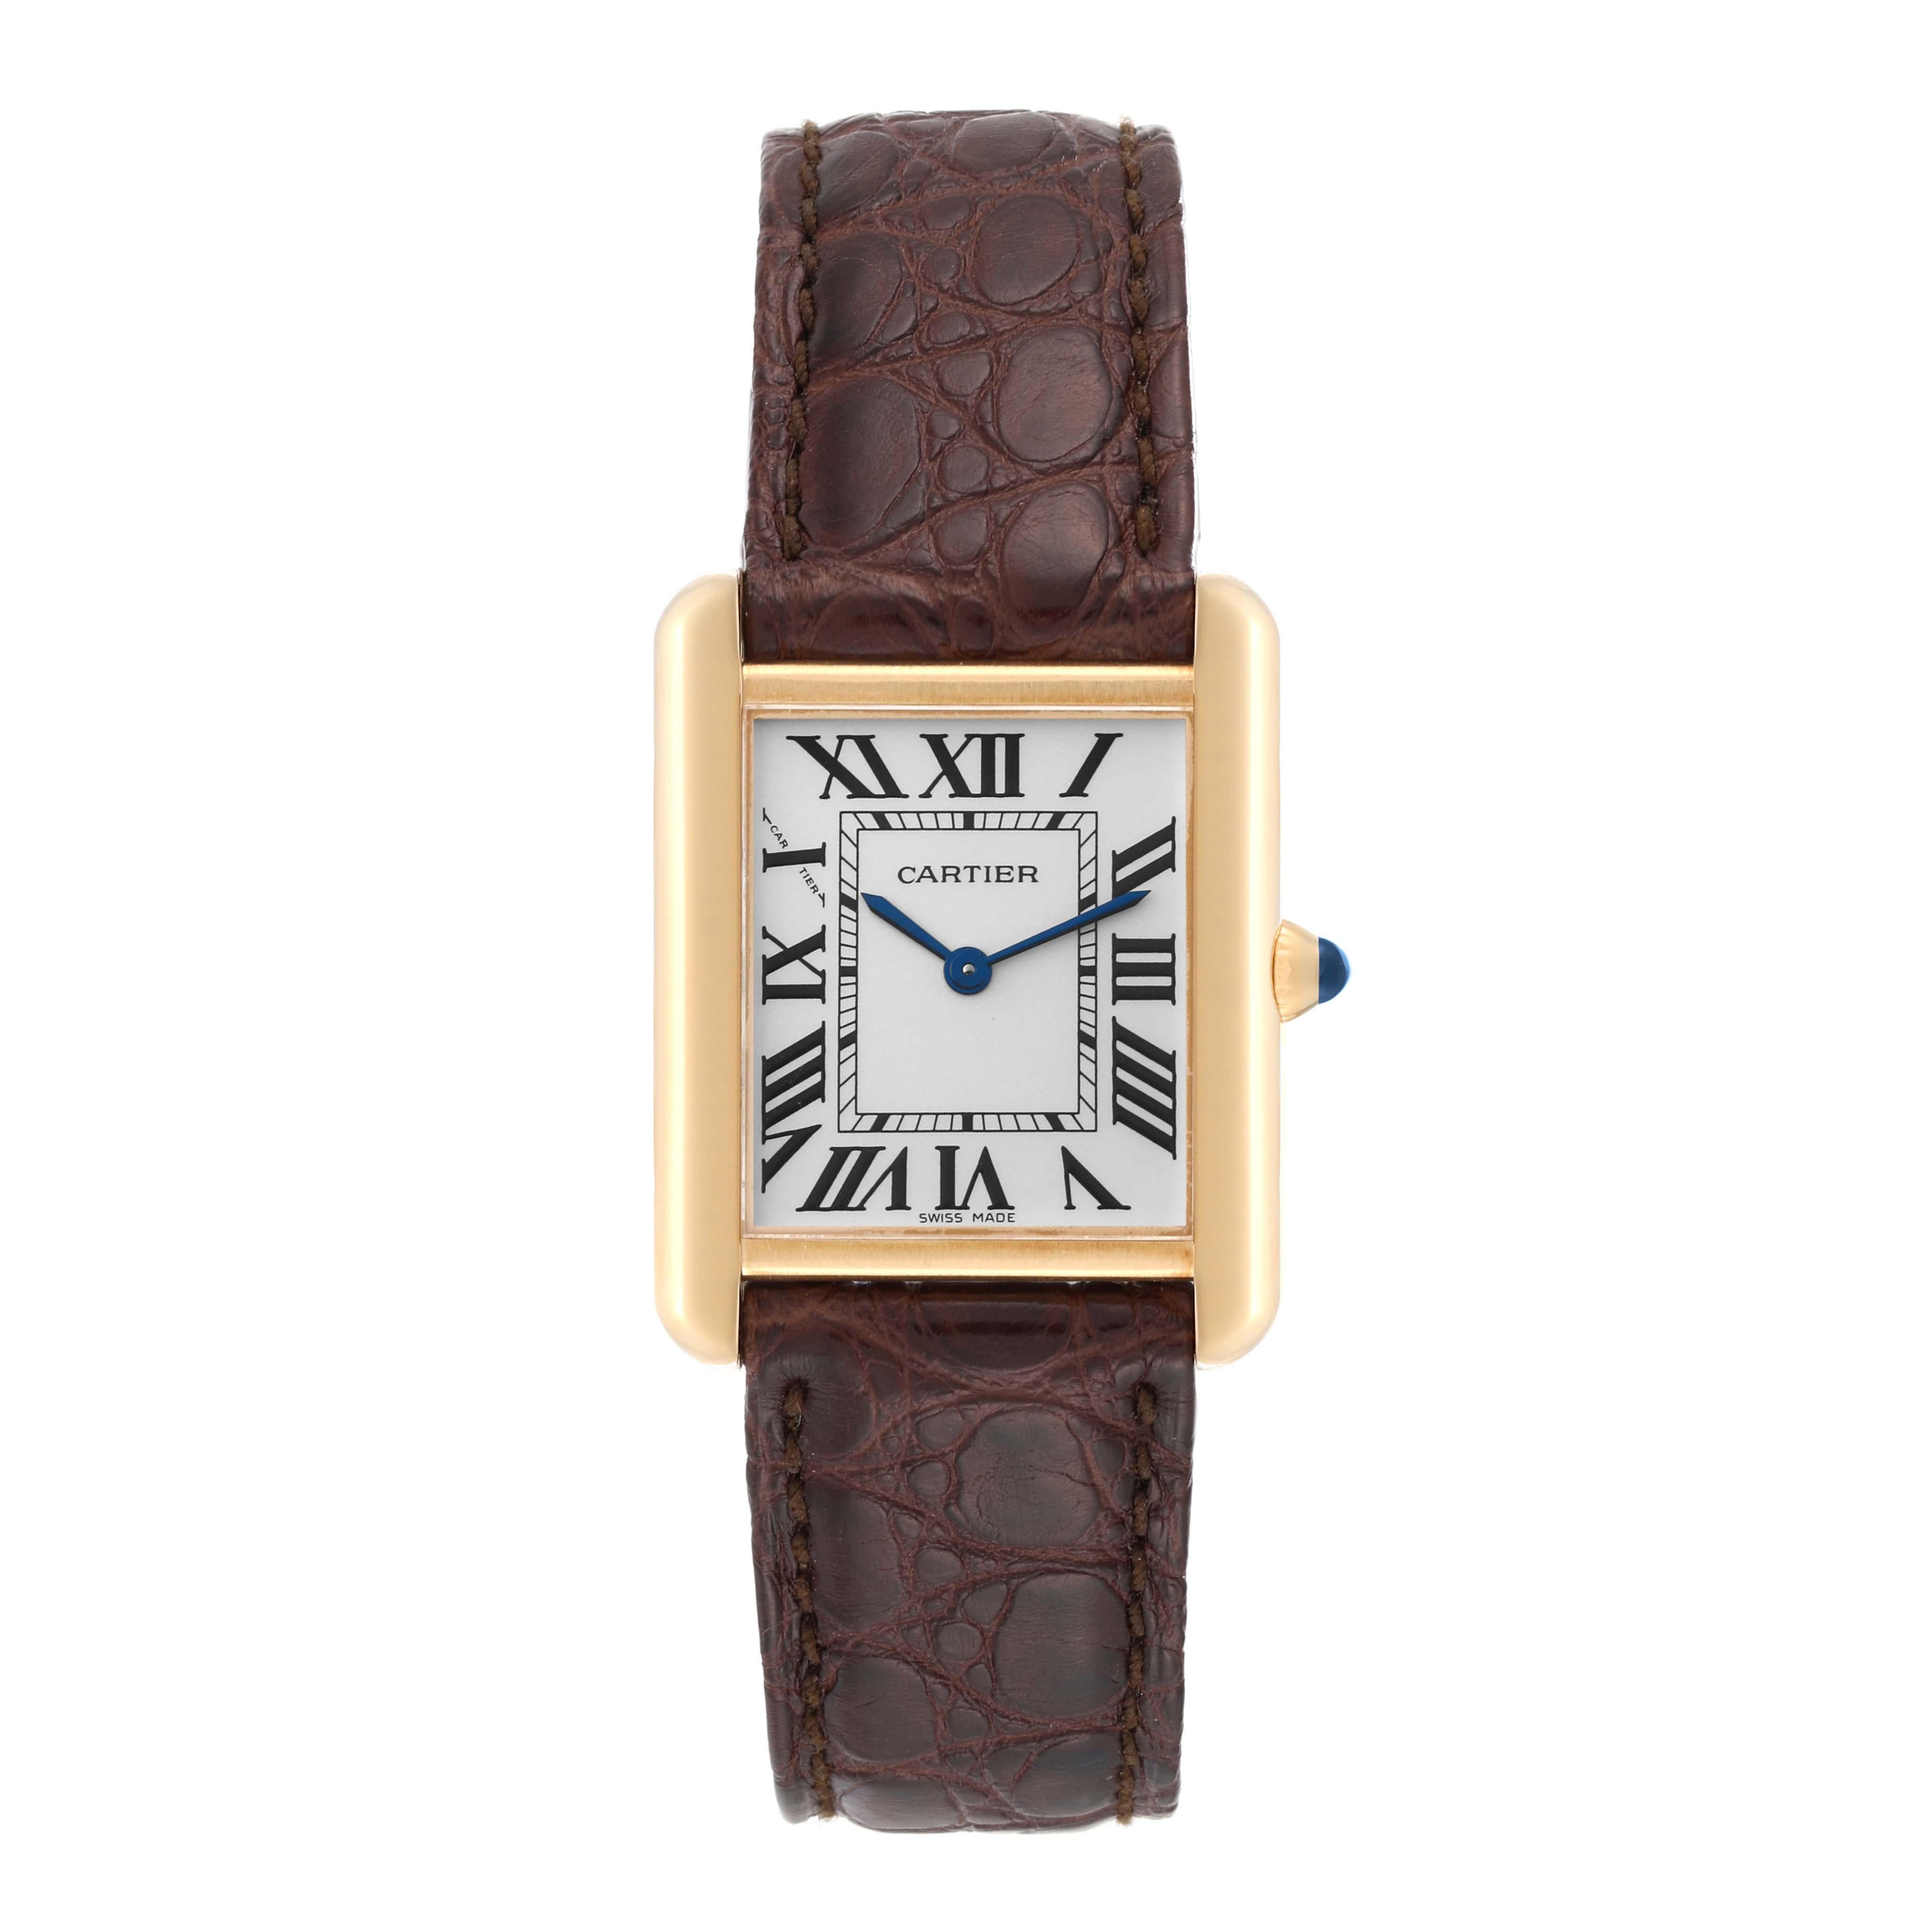 Cartier Tank Solo Yellow Gold Steel Silver Dial Ladies Watch W1018755. Quartz movement. 18k yellow gold case 30.0 x 23.0 mm. Stainless steel caseback. Circular grained crown set with a blue spinel cabochon. . Scratch resistant sapphire crystal.